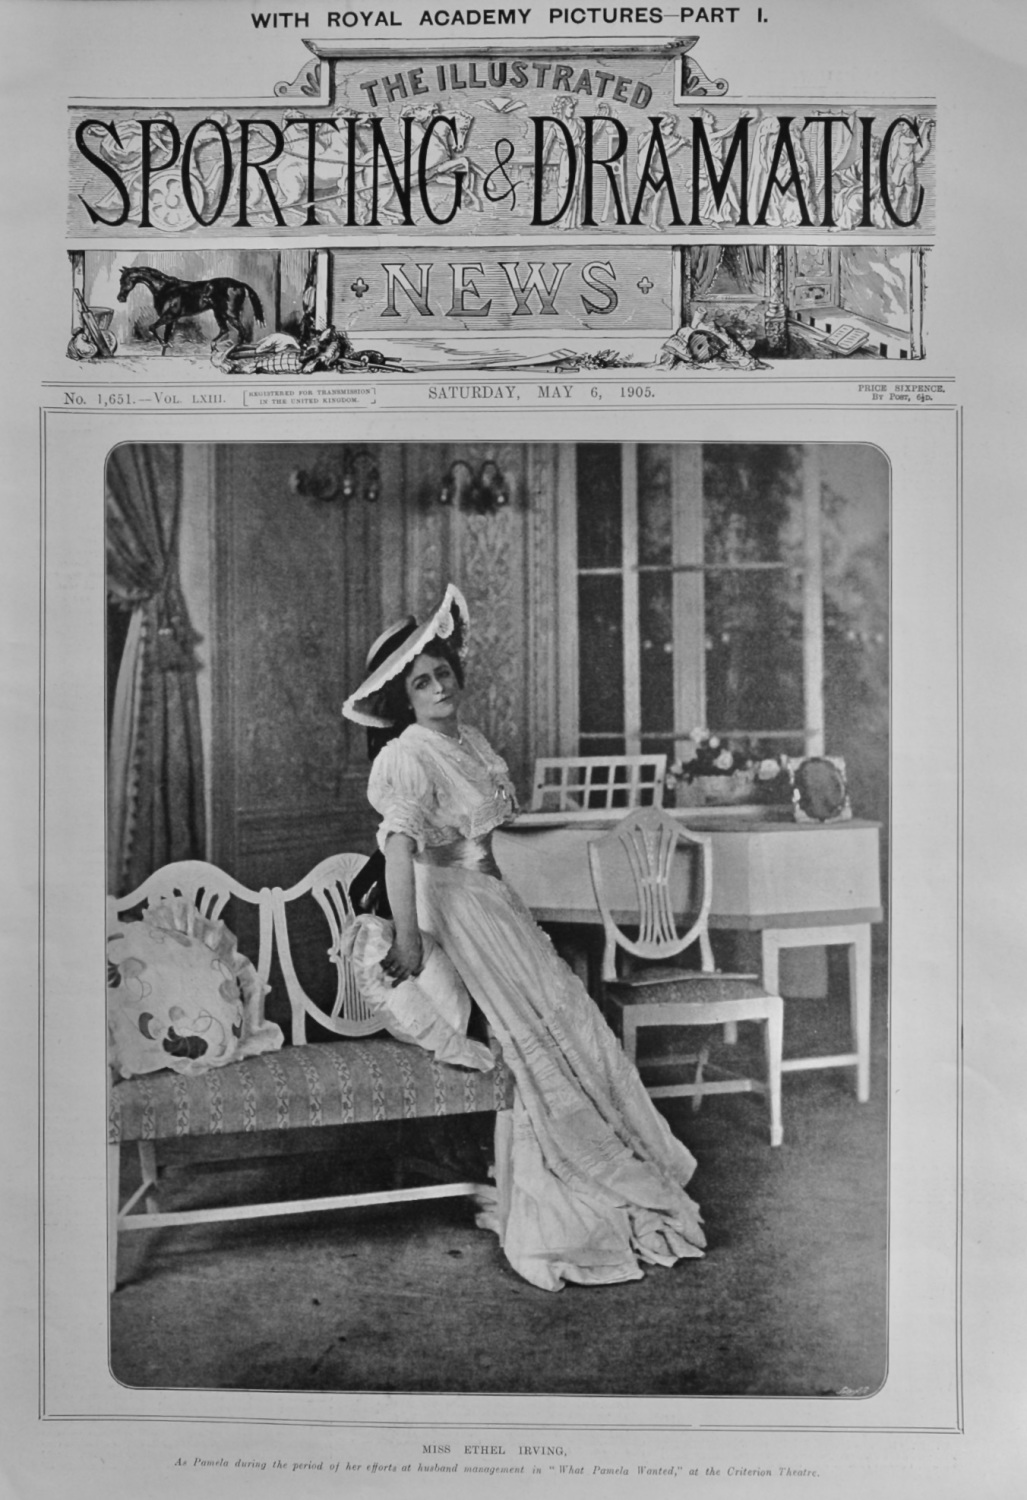 Miss Ethel Irving, as Pamela during the period of her efforts at husband ma